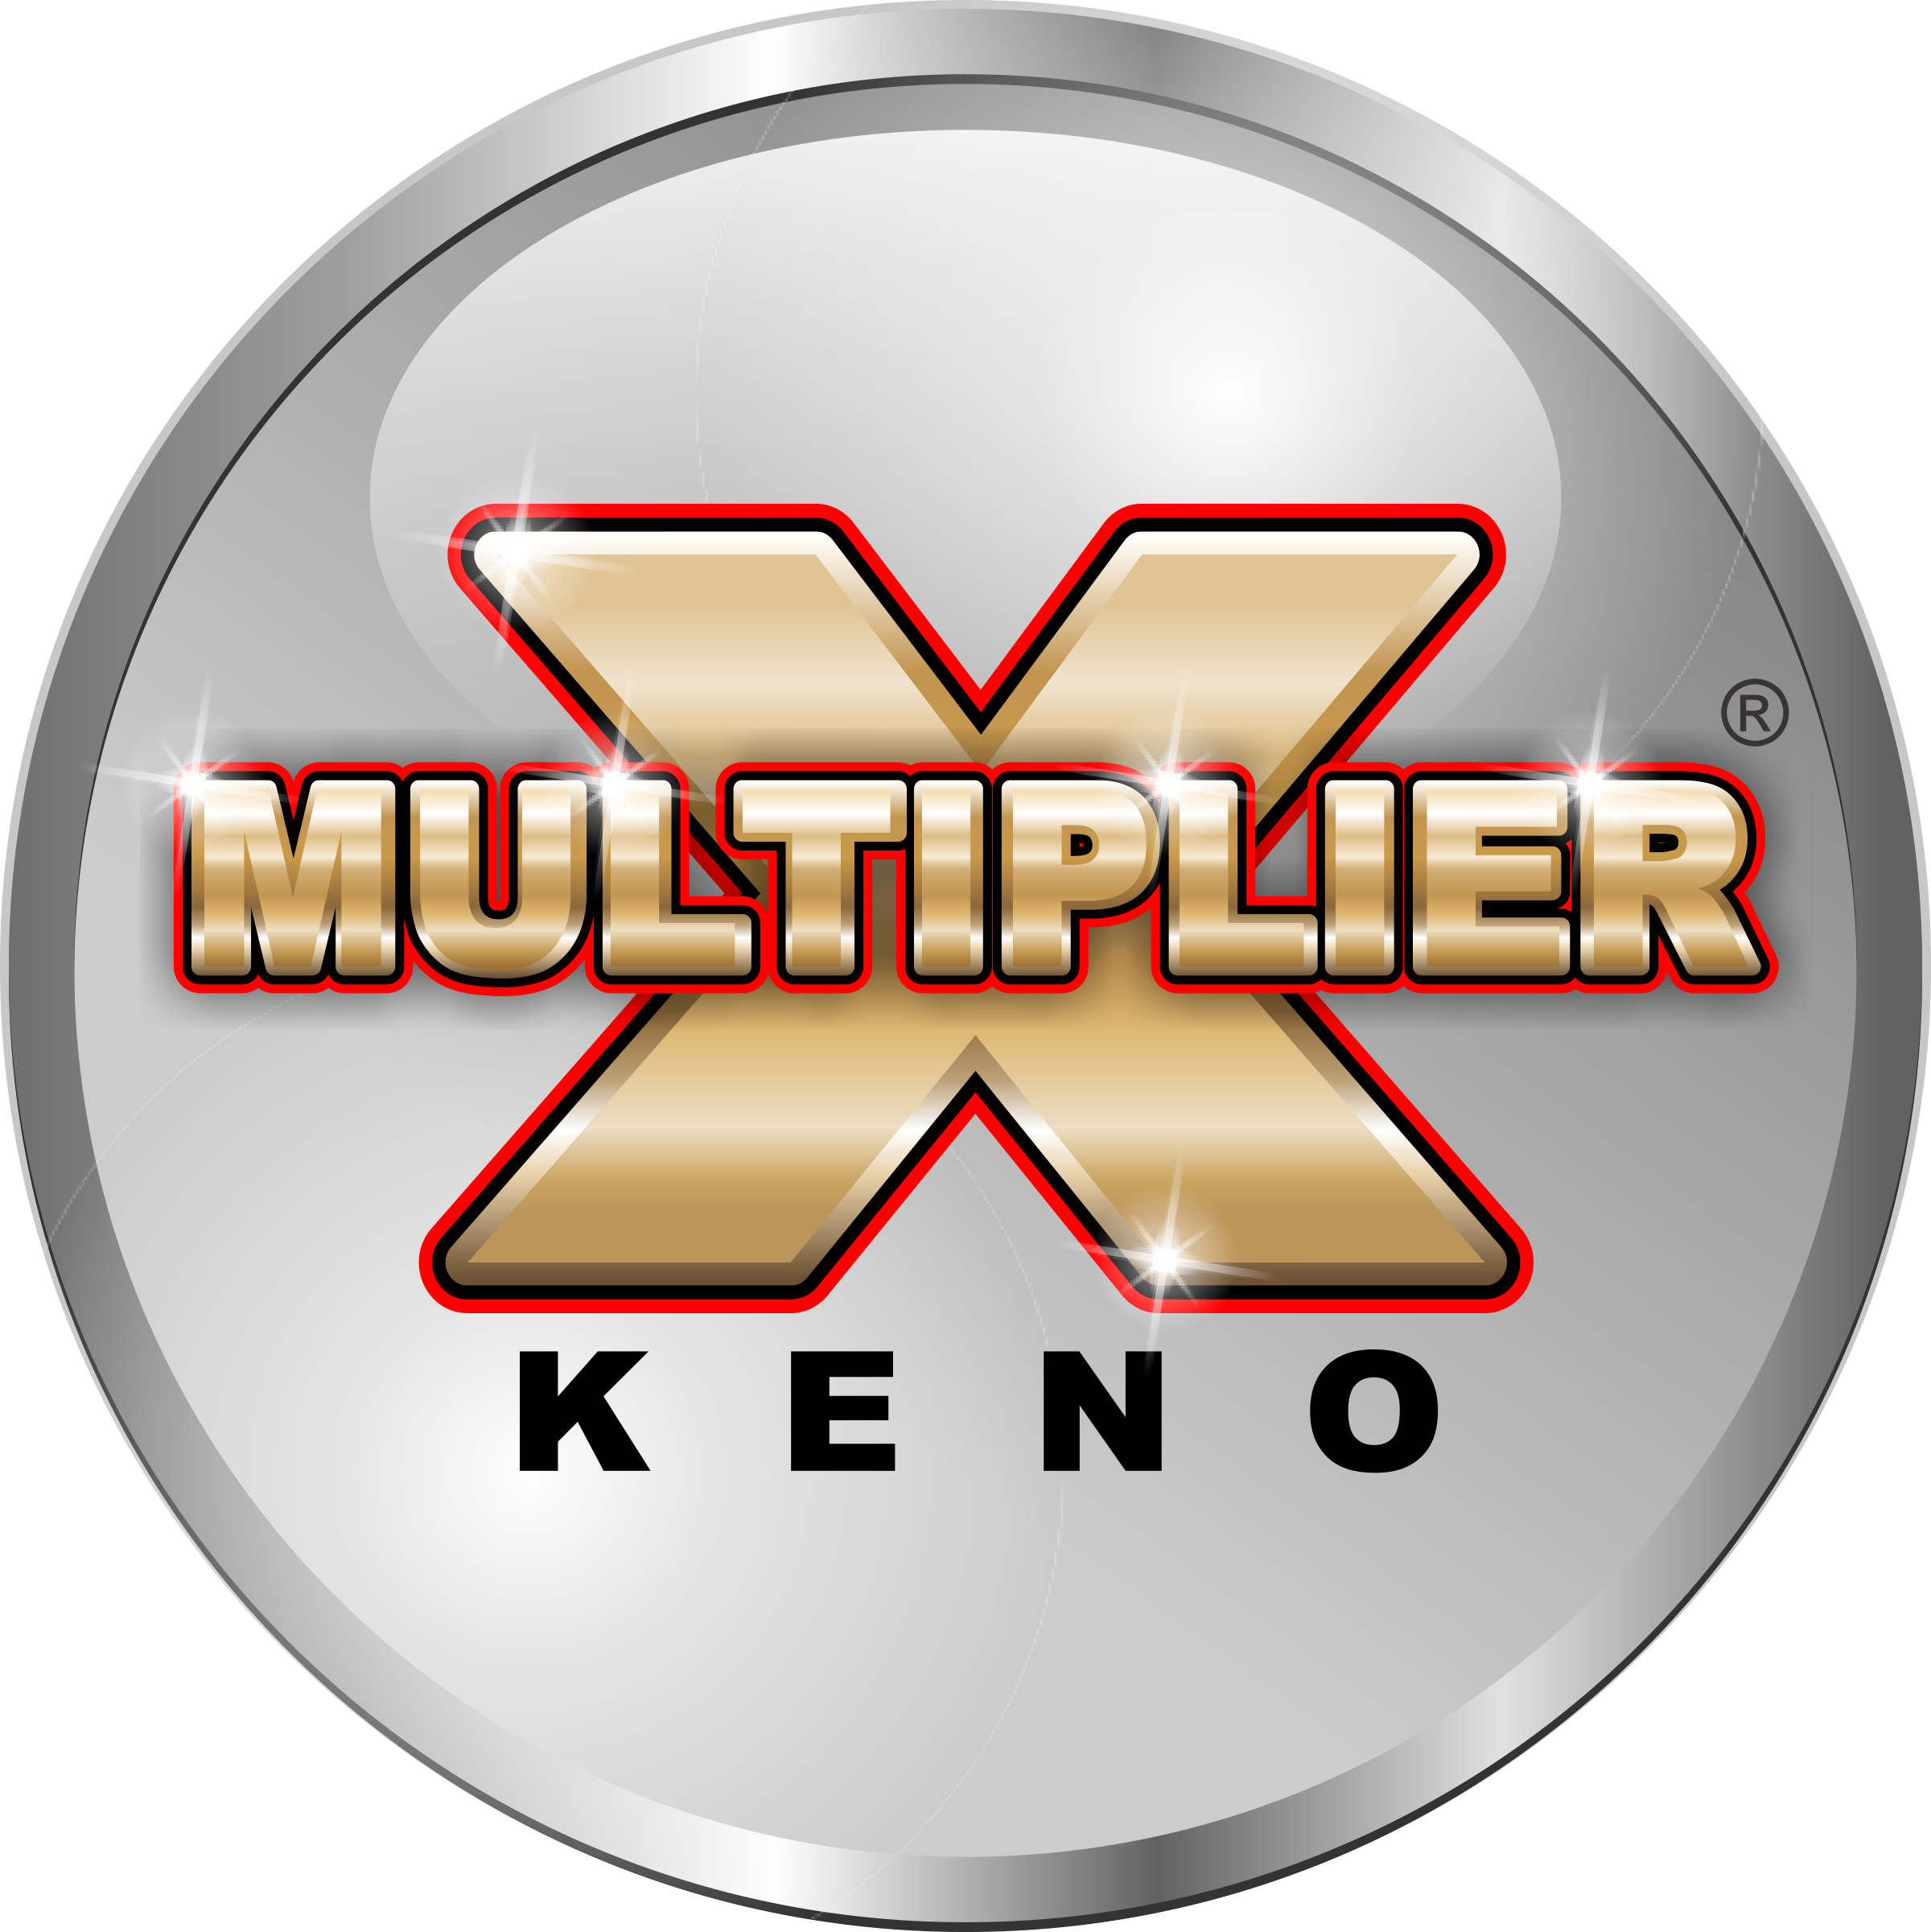 Play Kiosk Keno At Seven Feathers Casino Resort In Canyonville Oregon